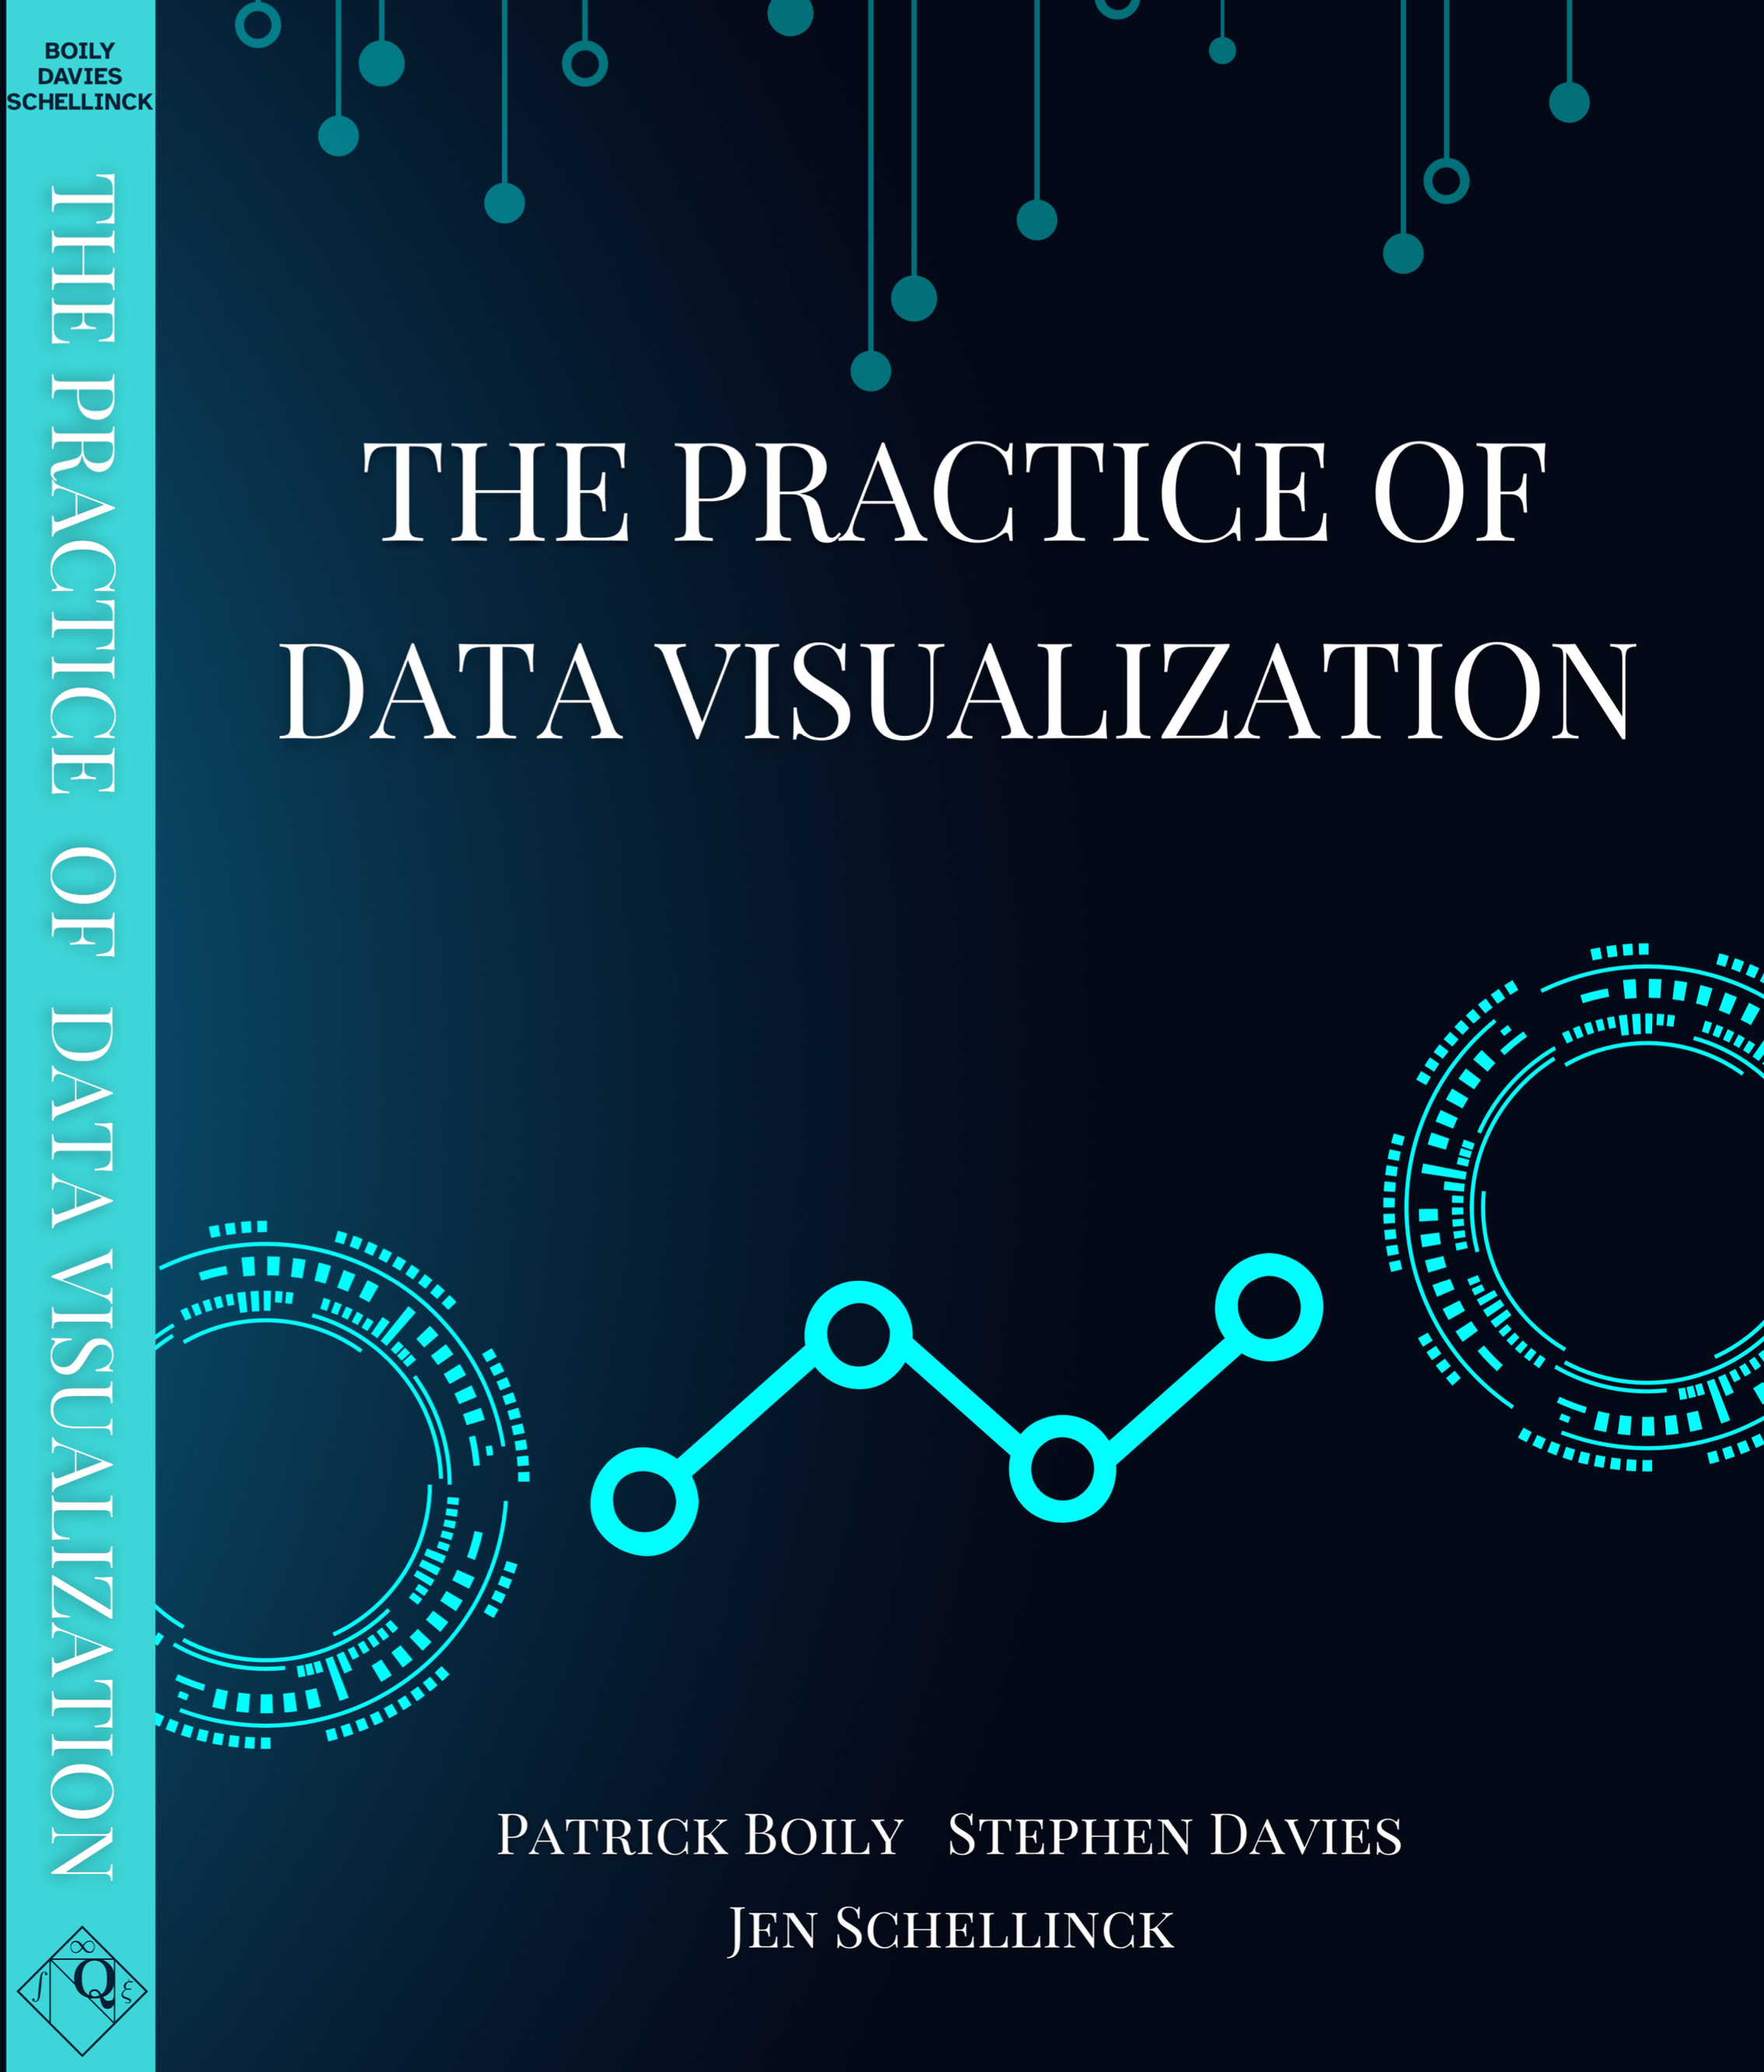 The Practice of Data Visualization